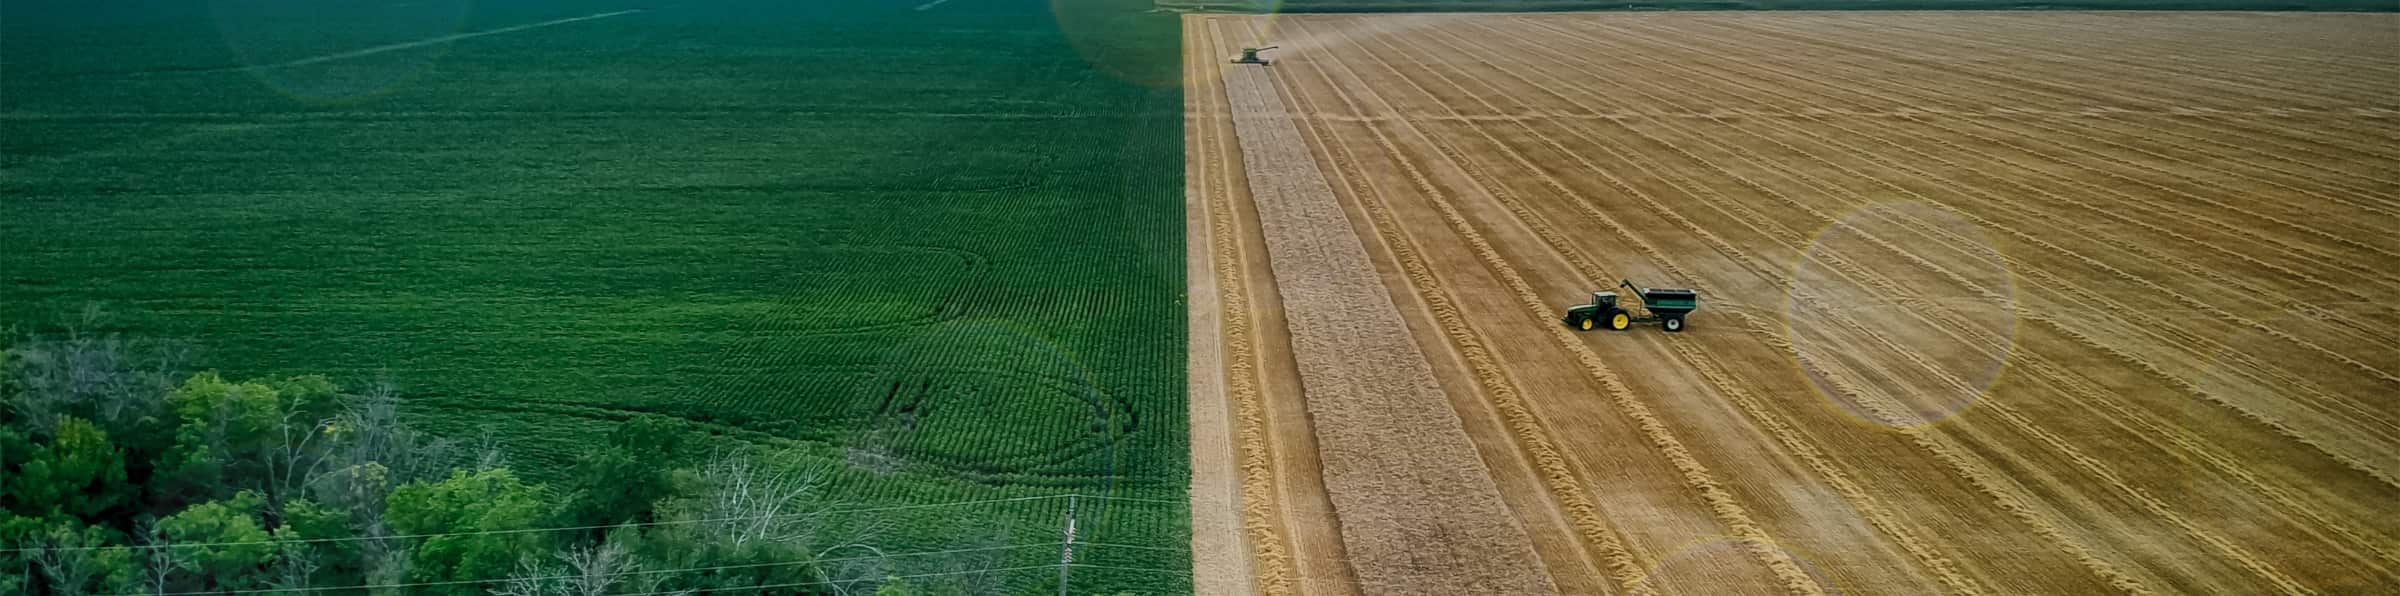 Ariel view of a field being harvested